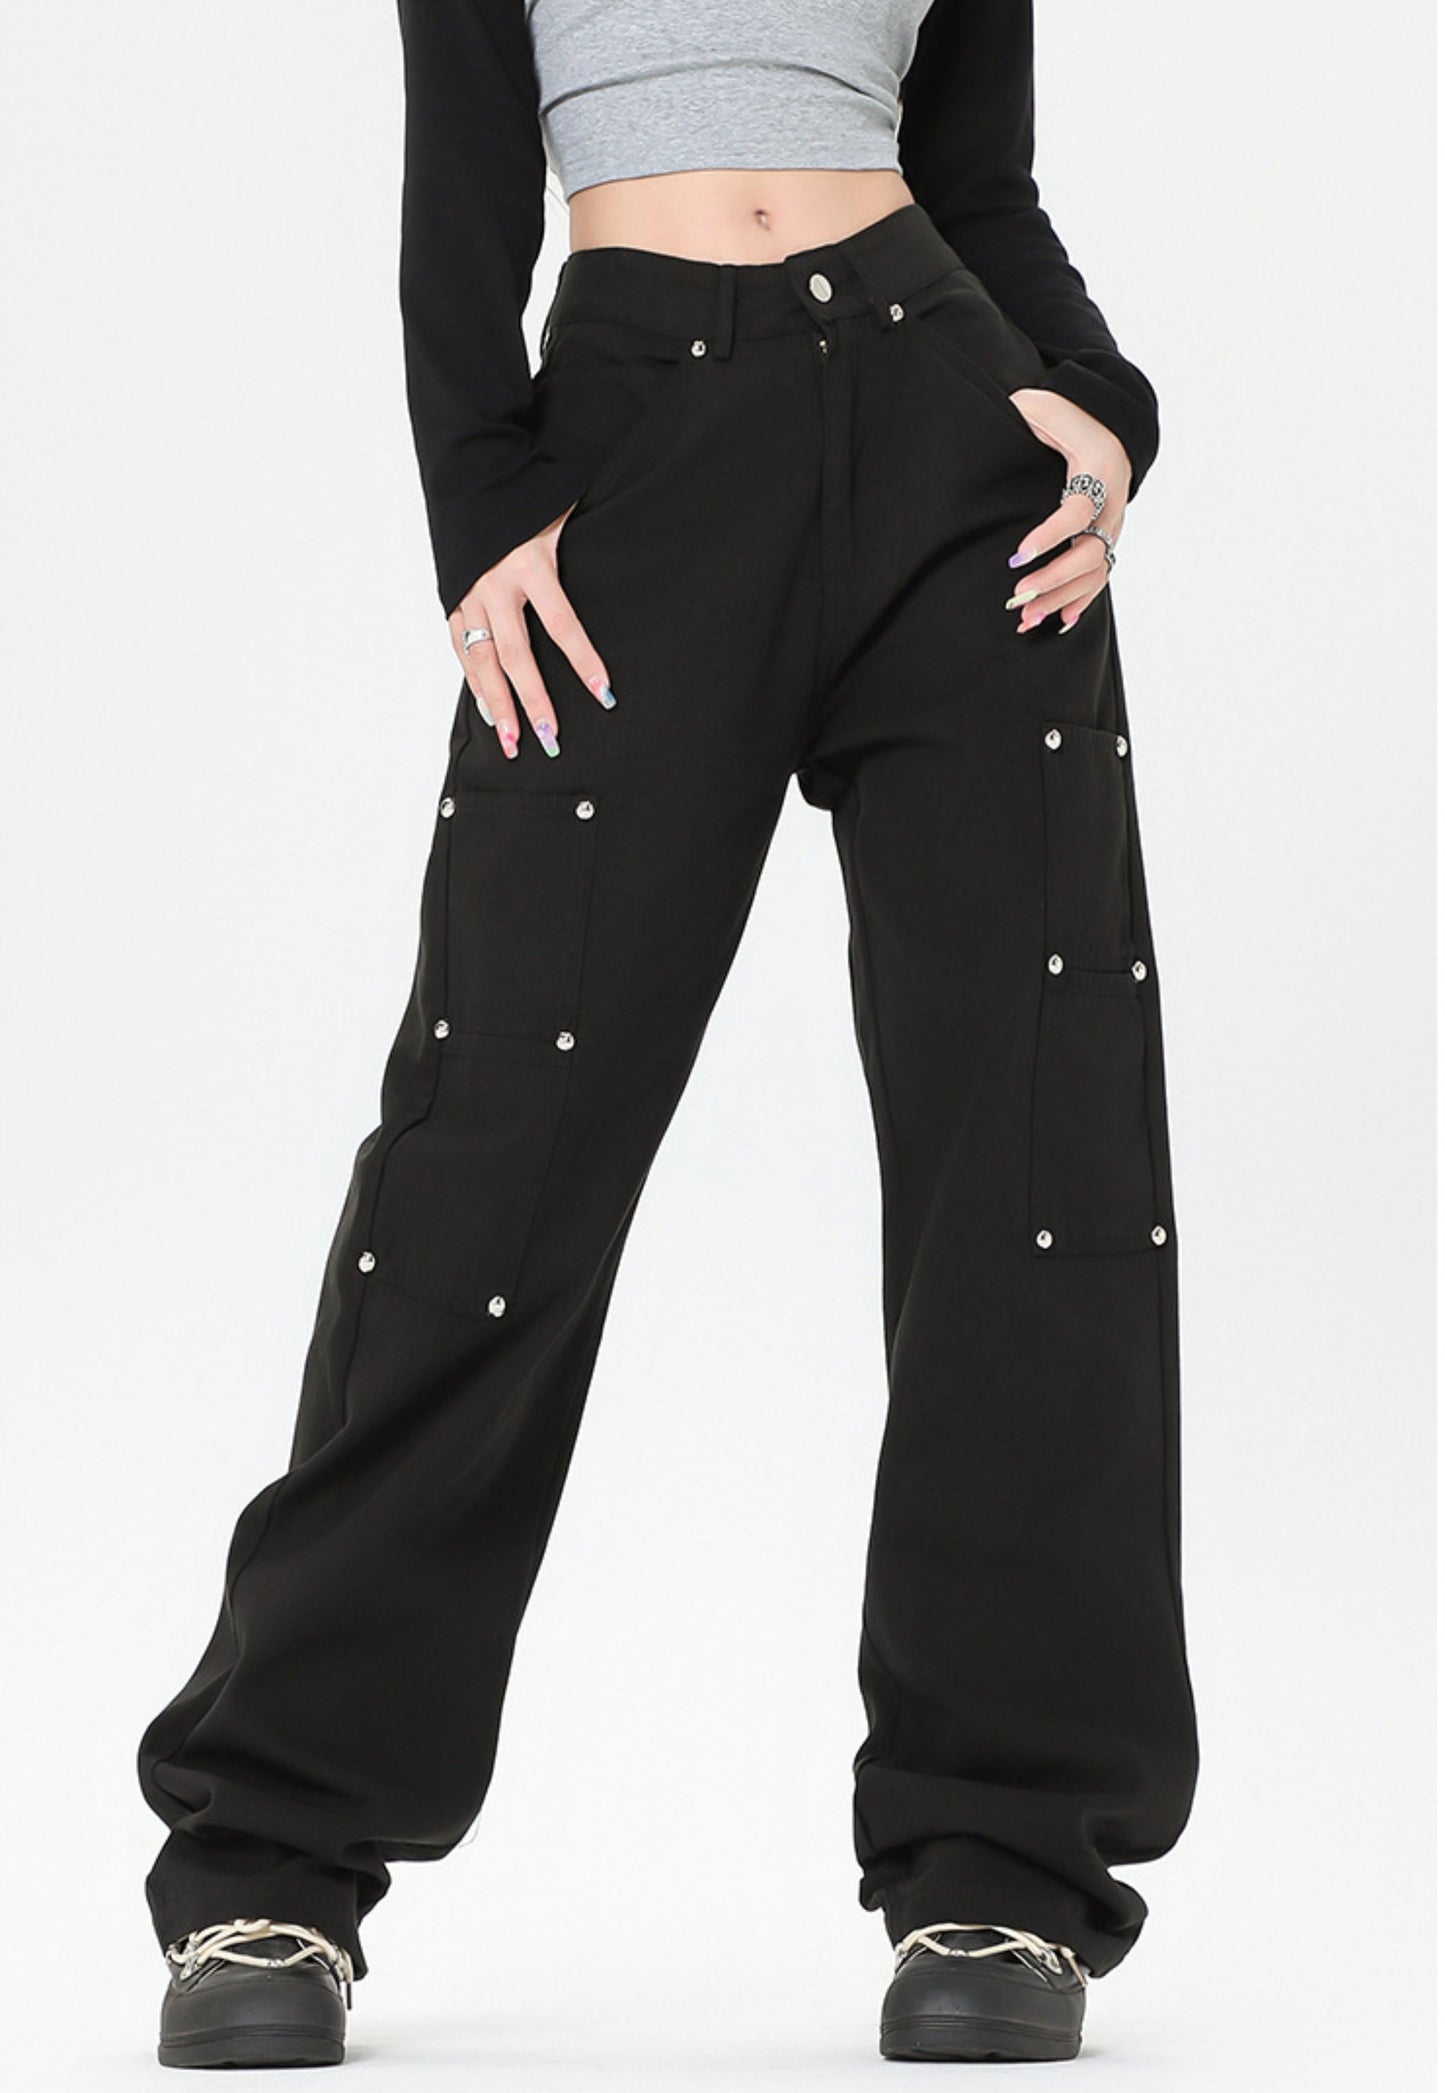 Unisex 3 Colors Studded High Street Style Casual Pants